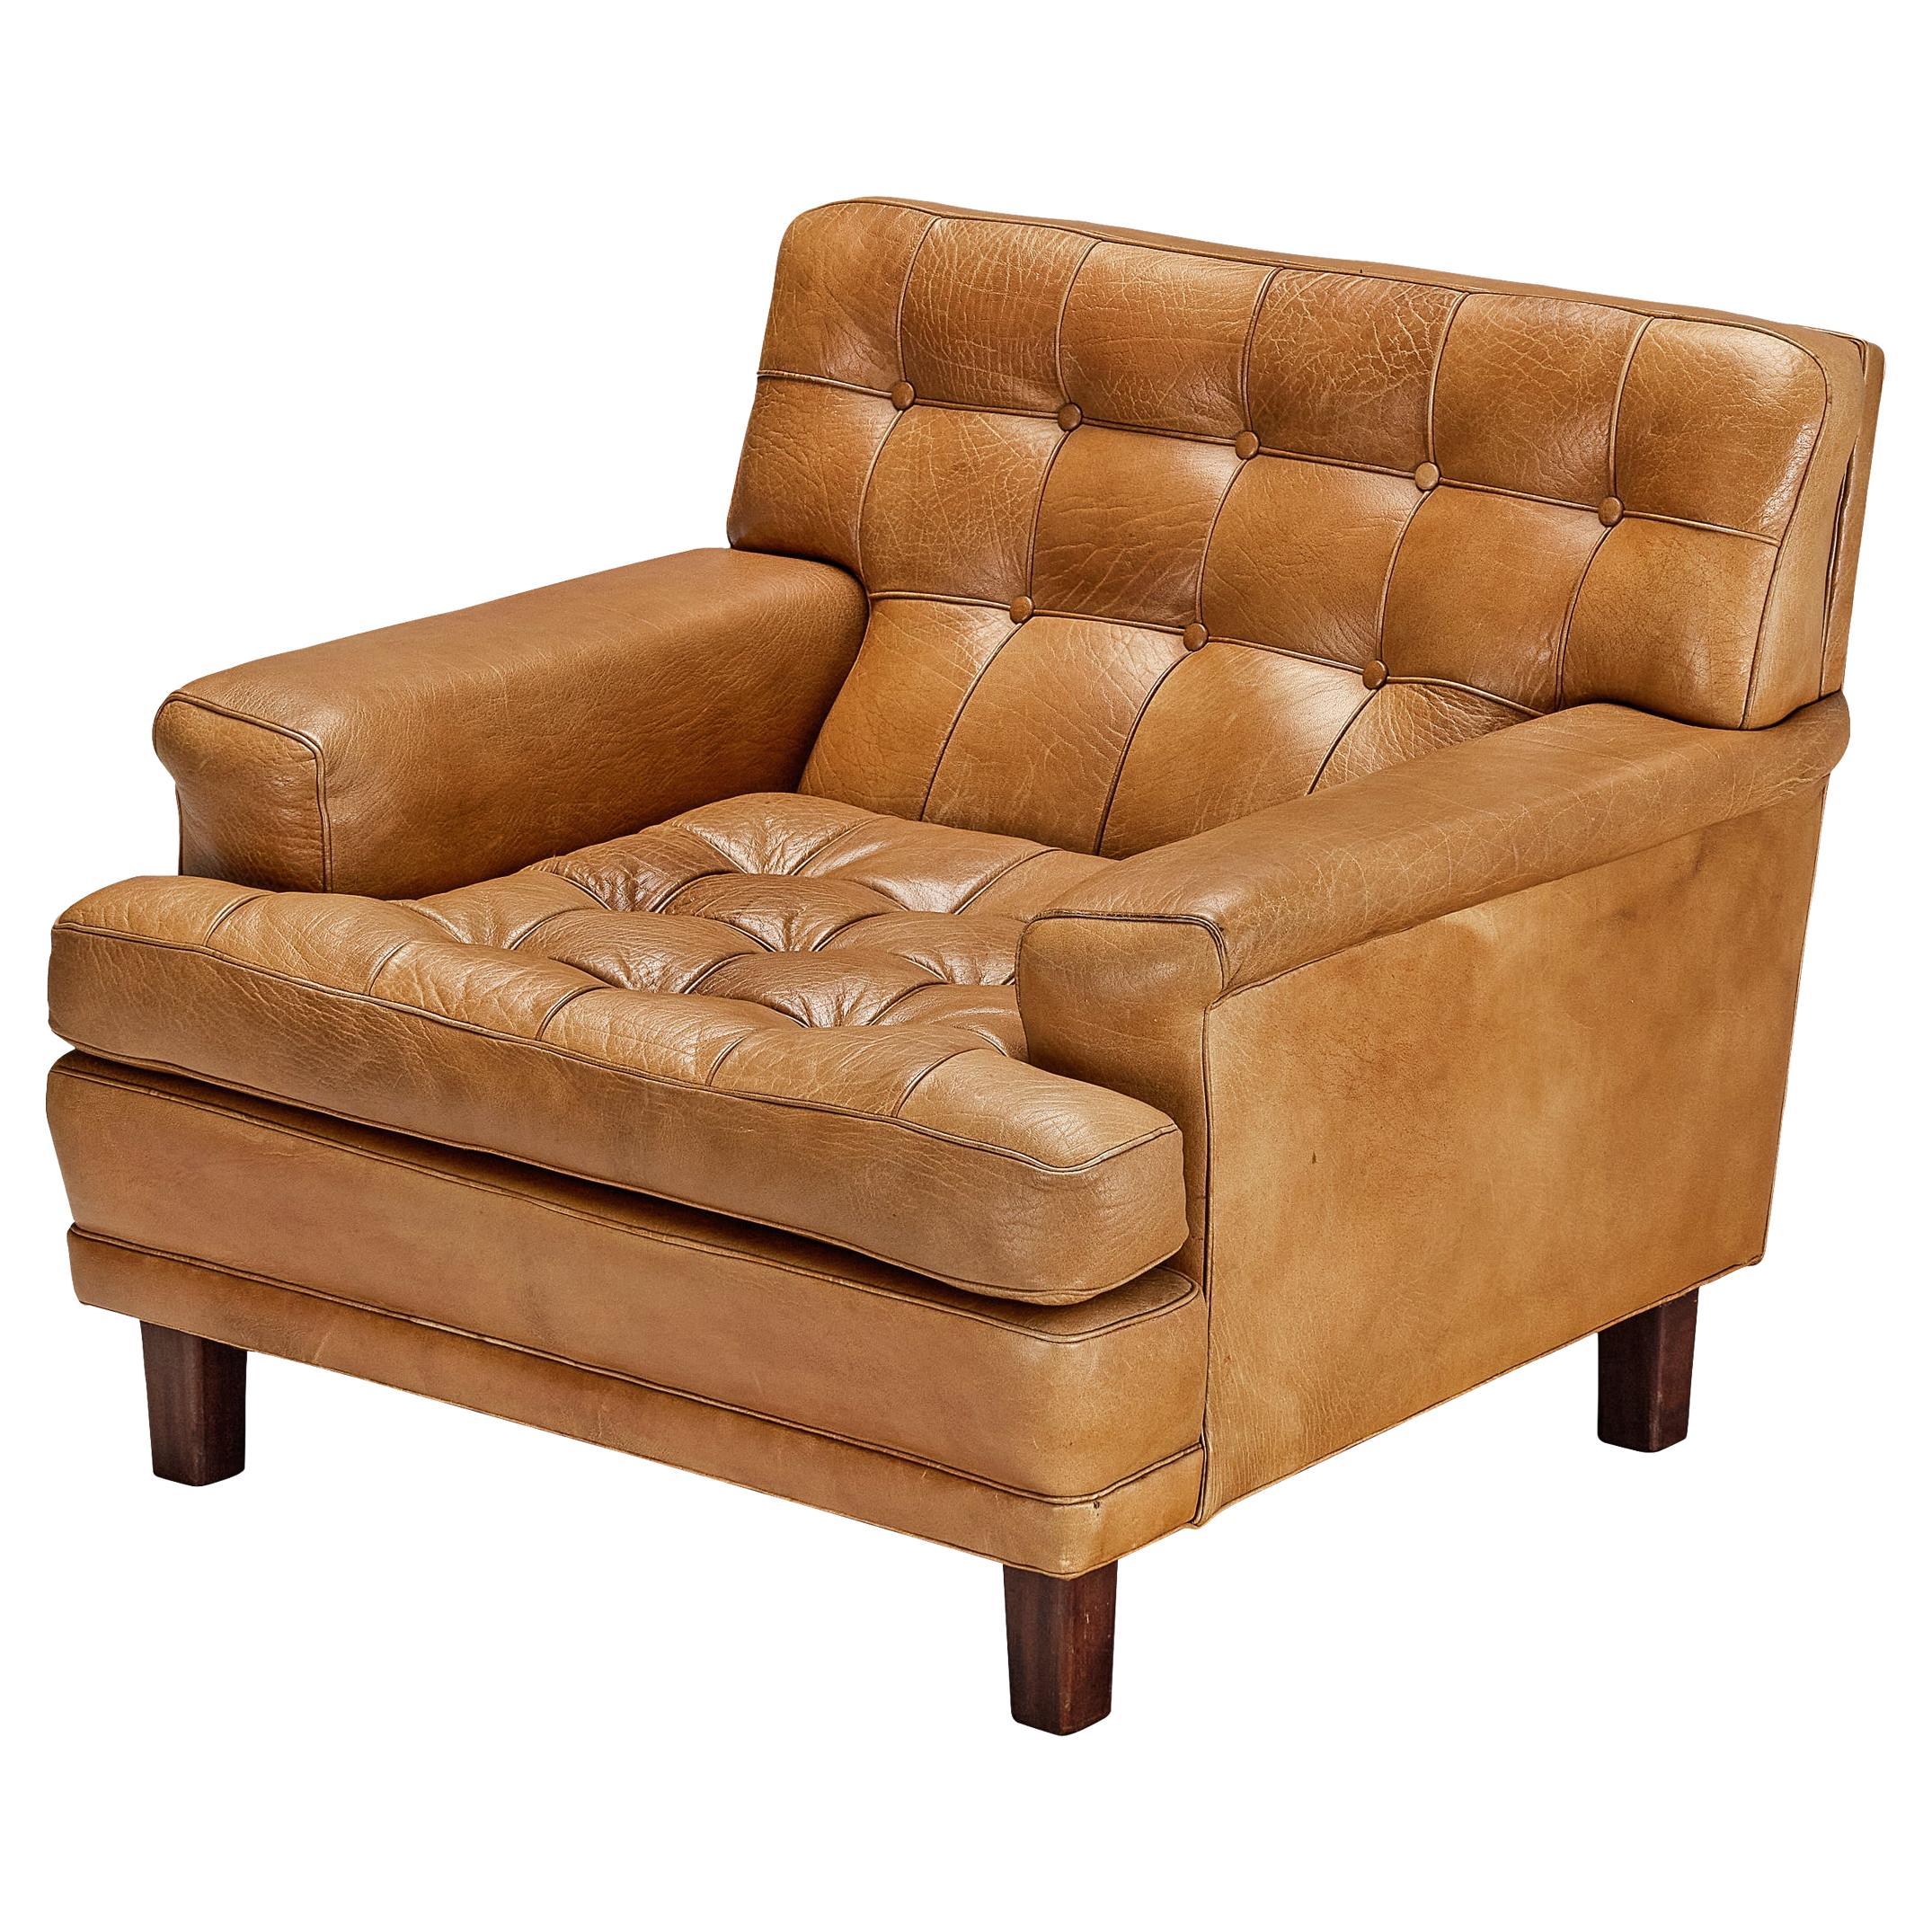 Arne Norell 'Merkur' Lounge Chair in Cognac Leather and Mahogany 